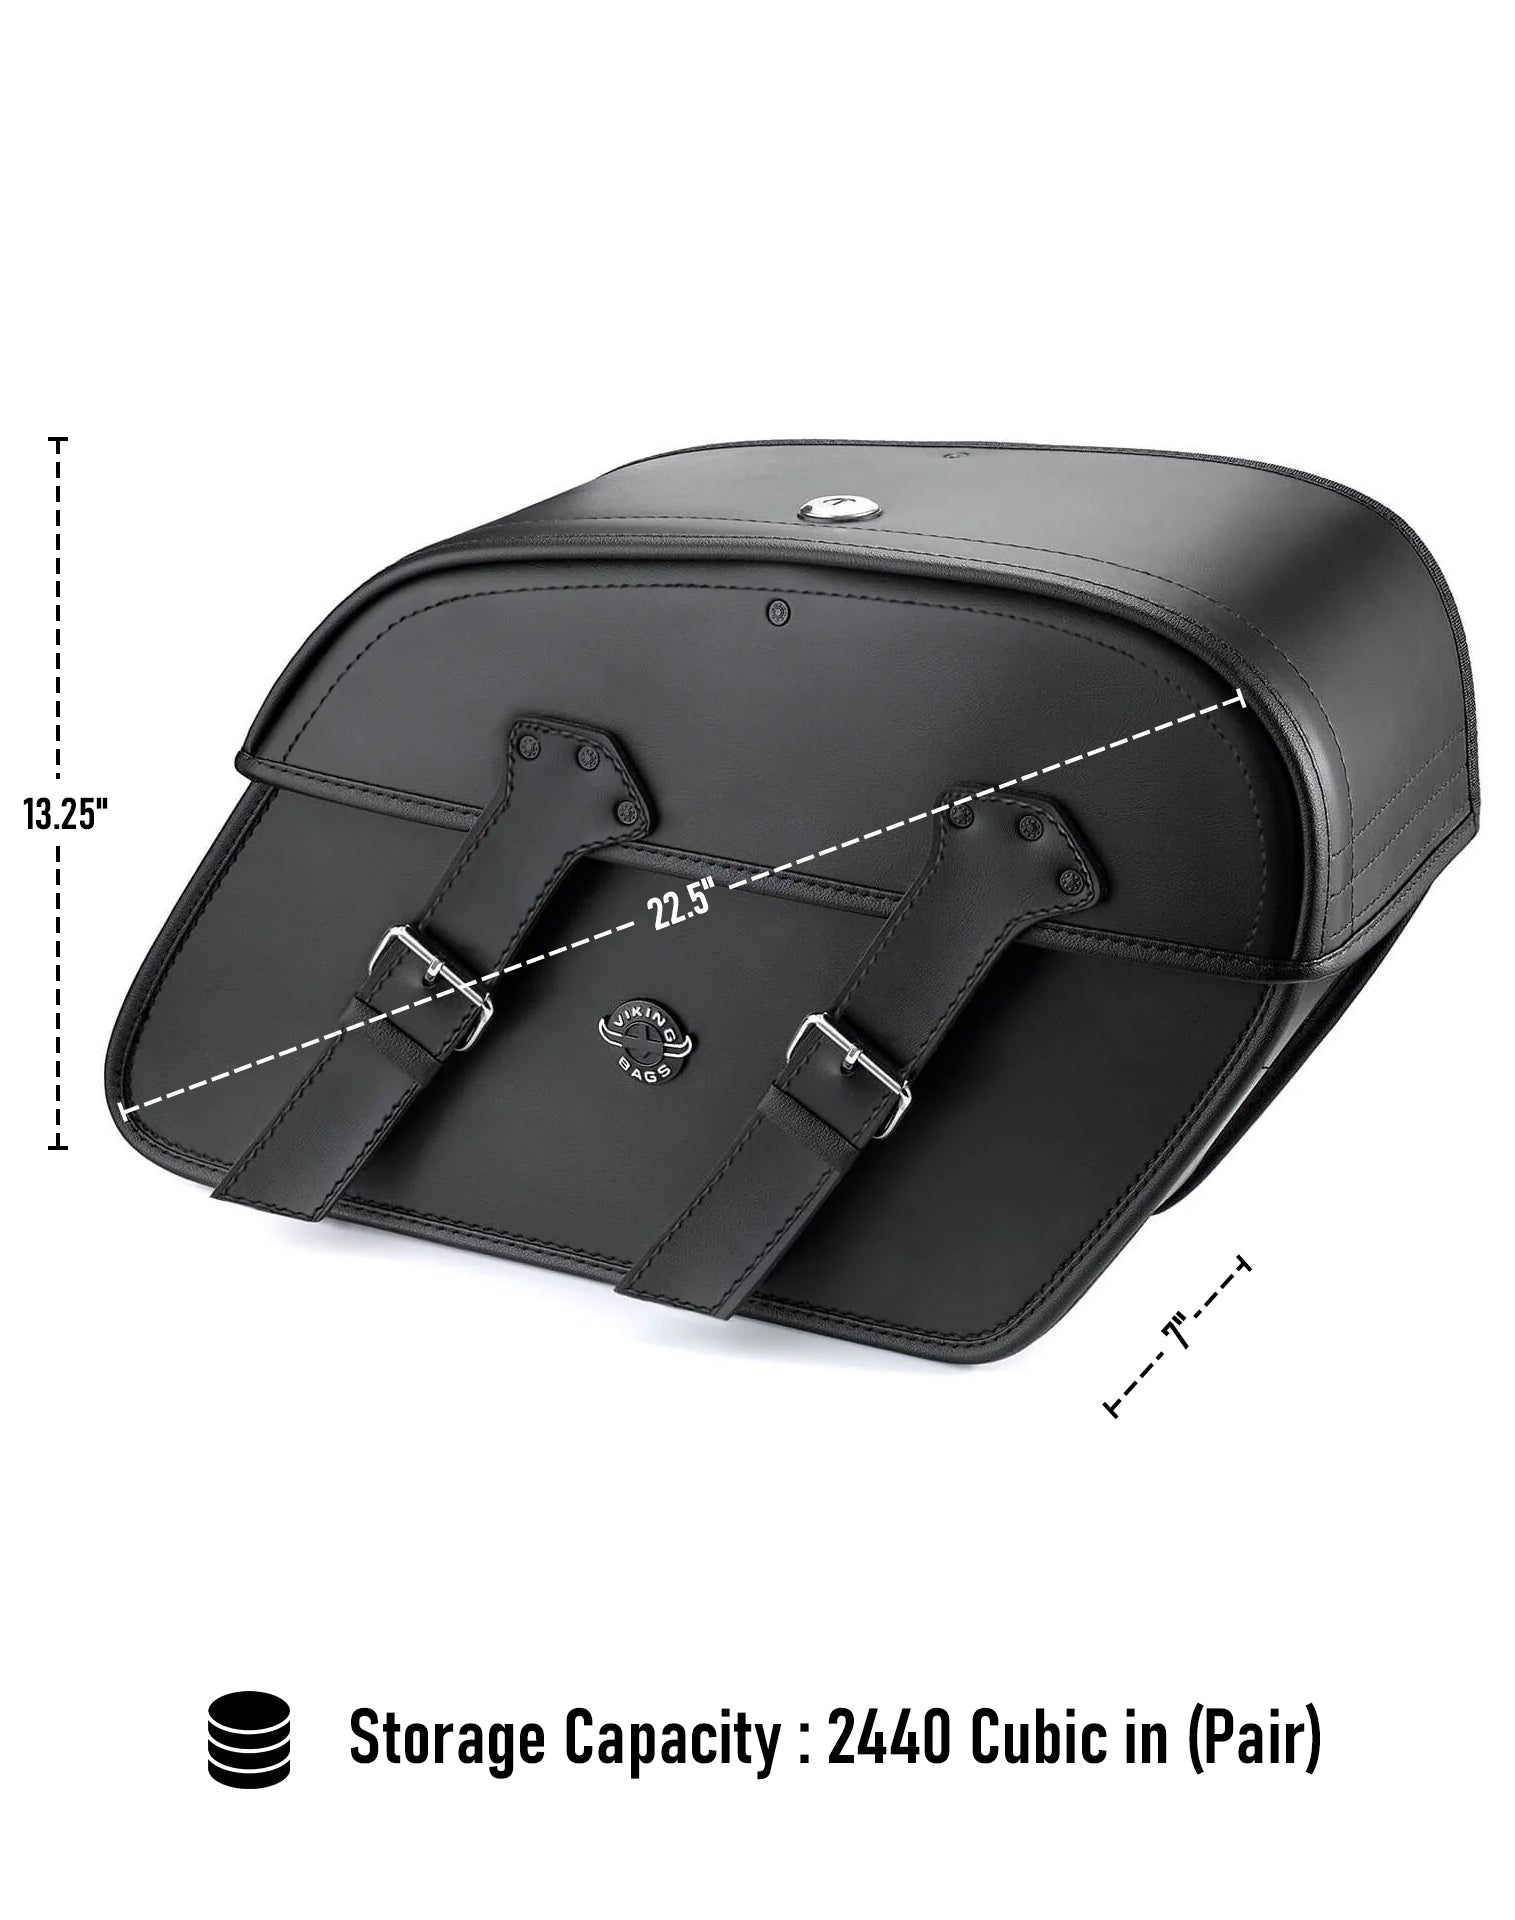 Viking Raven Extra Large Victory V92C Leather Motorcycle Saddlebags Can Store Your Ridings Gears